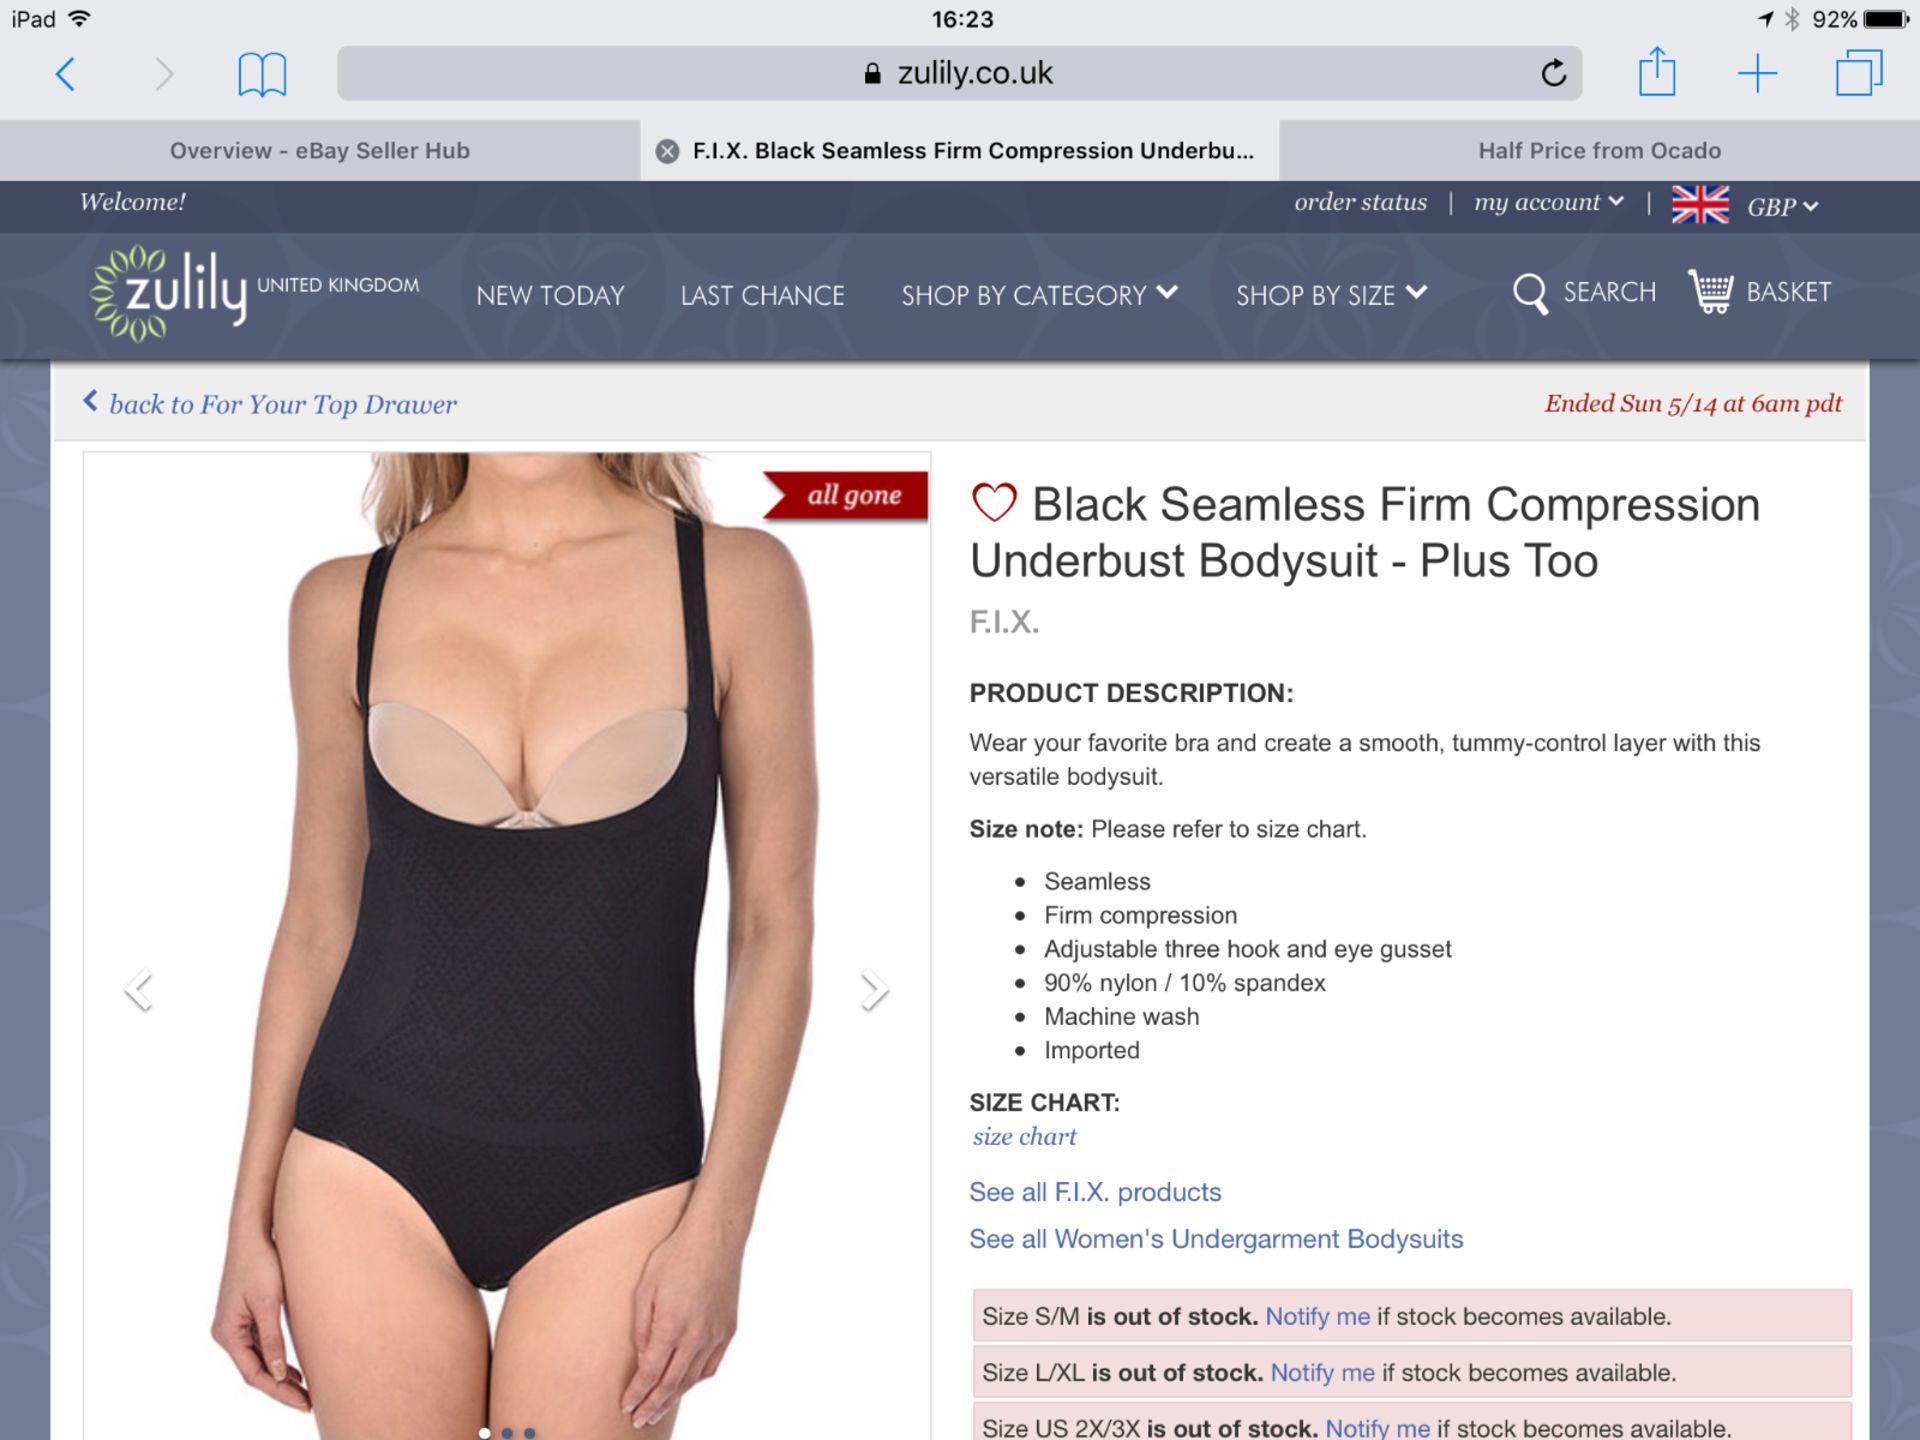 F.I.X. Black Seamless Firm Compression Underbust Bodysuit, Size S/M (New With Tags) [Ref: -T-] - Image 4 of 5